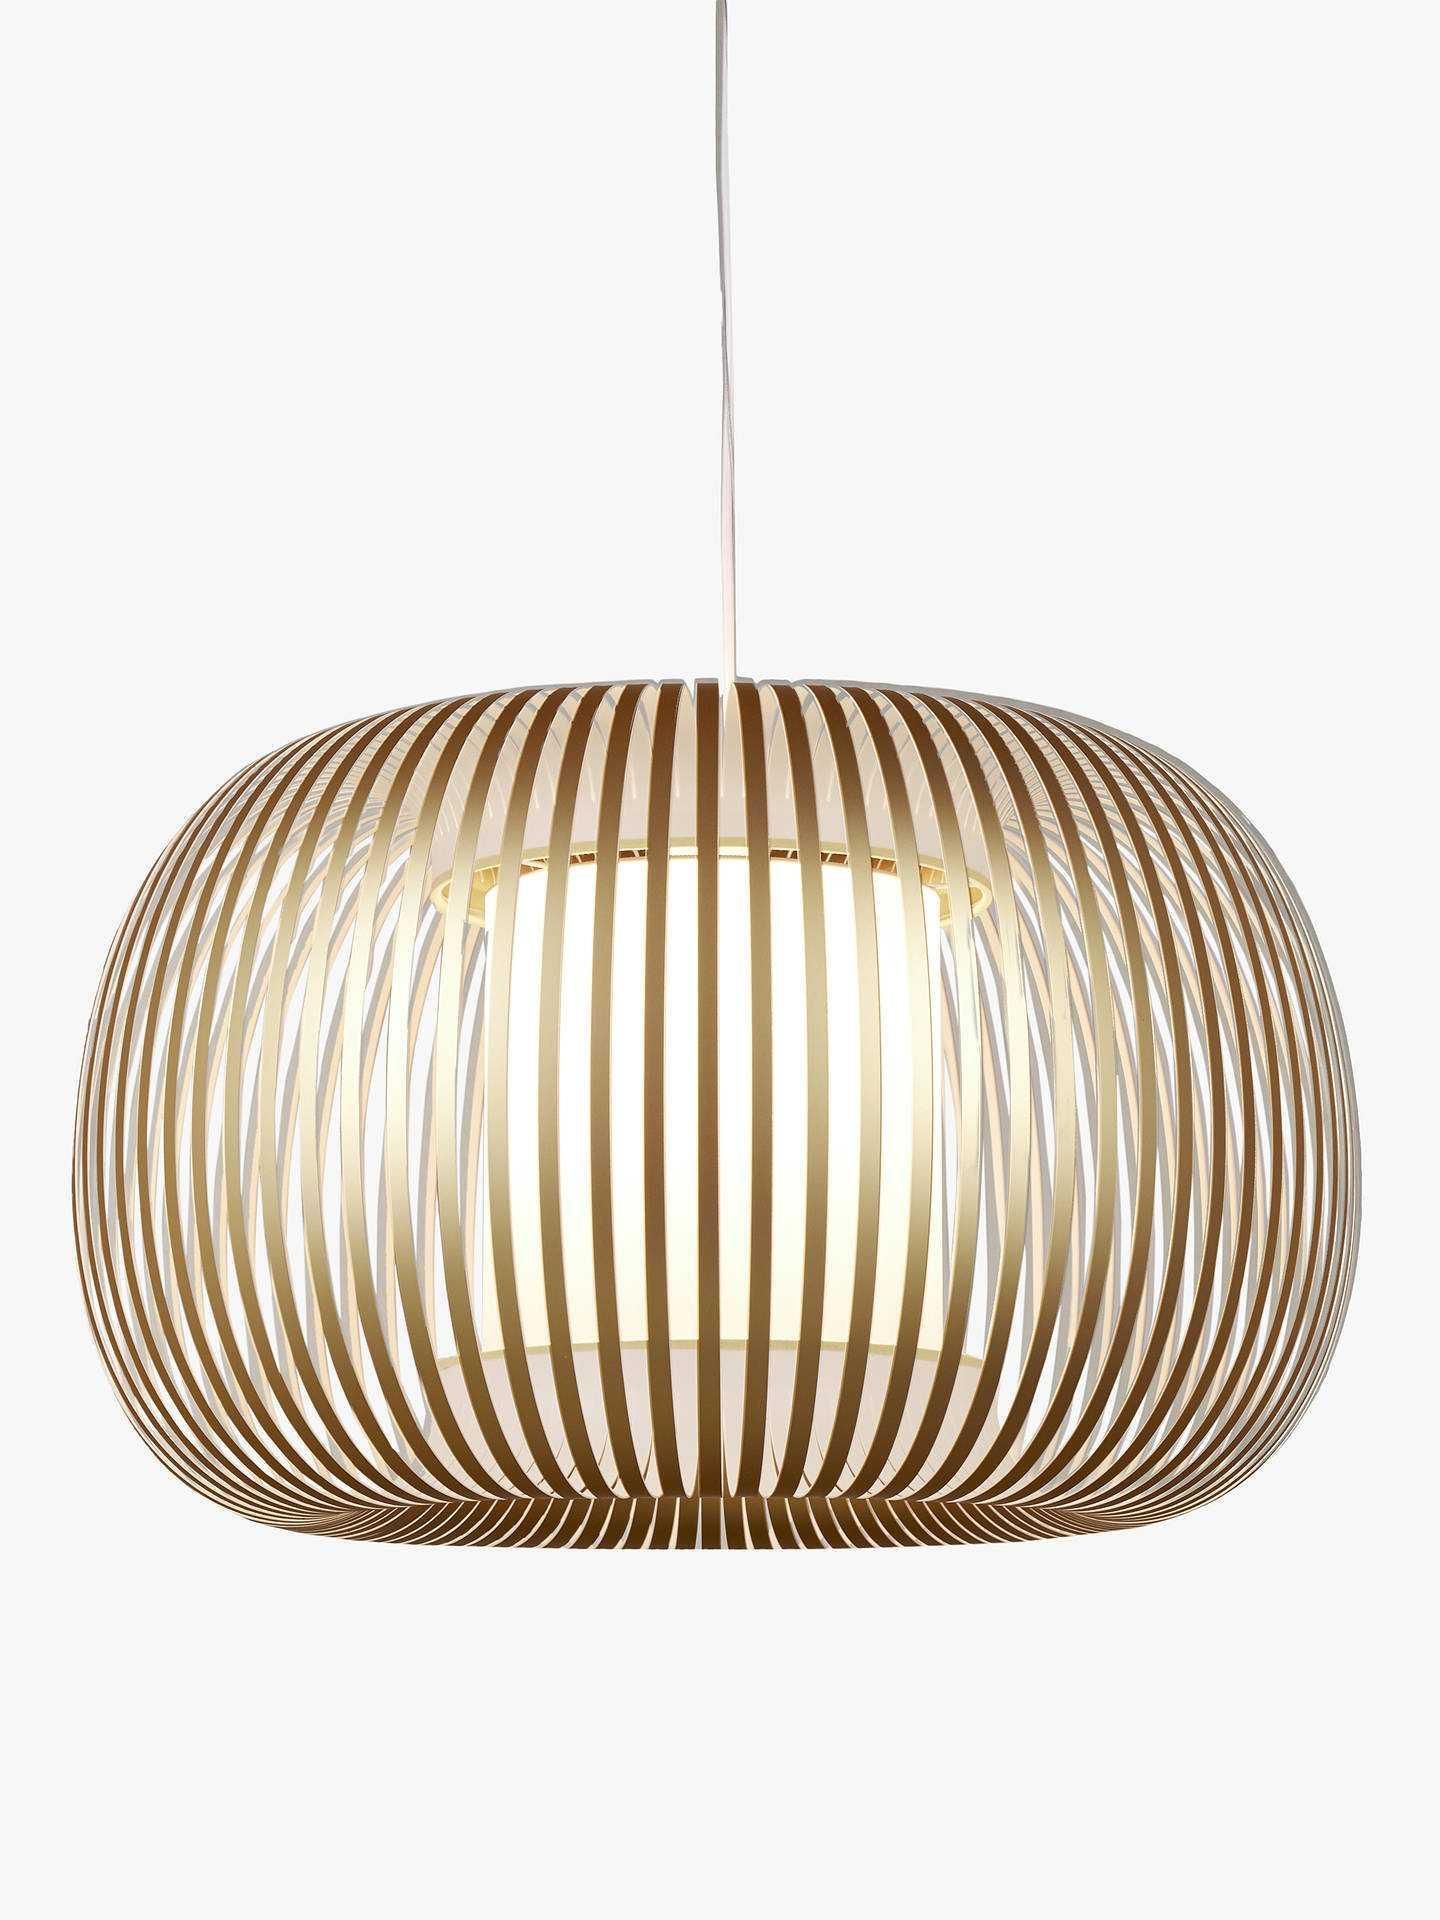 RRP £80 Unboxed Harmony Ribbon Ceiling Light Shade